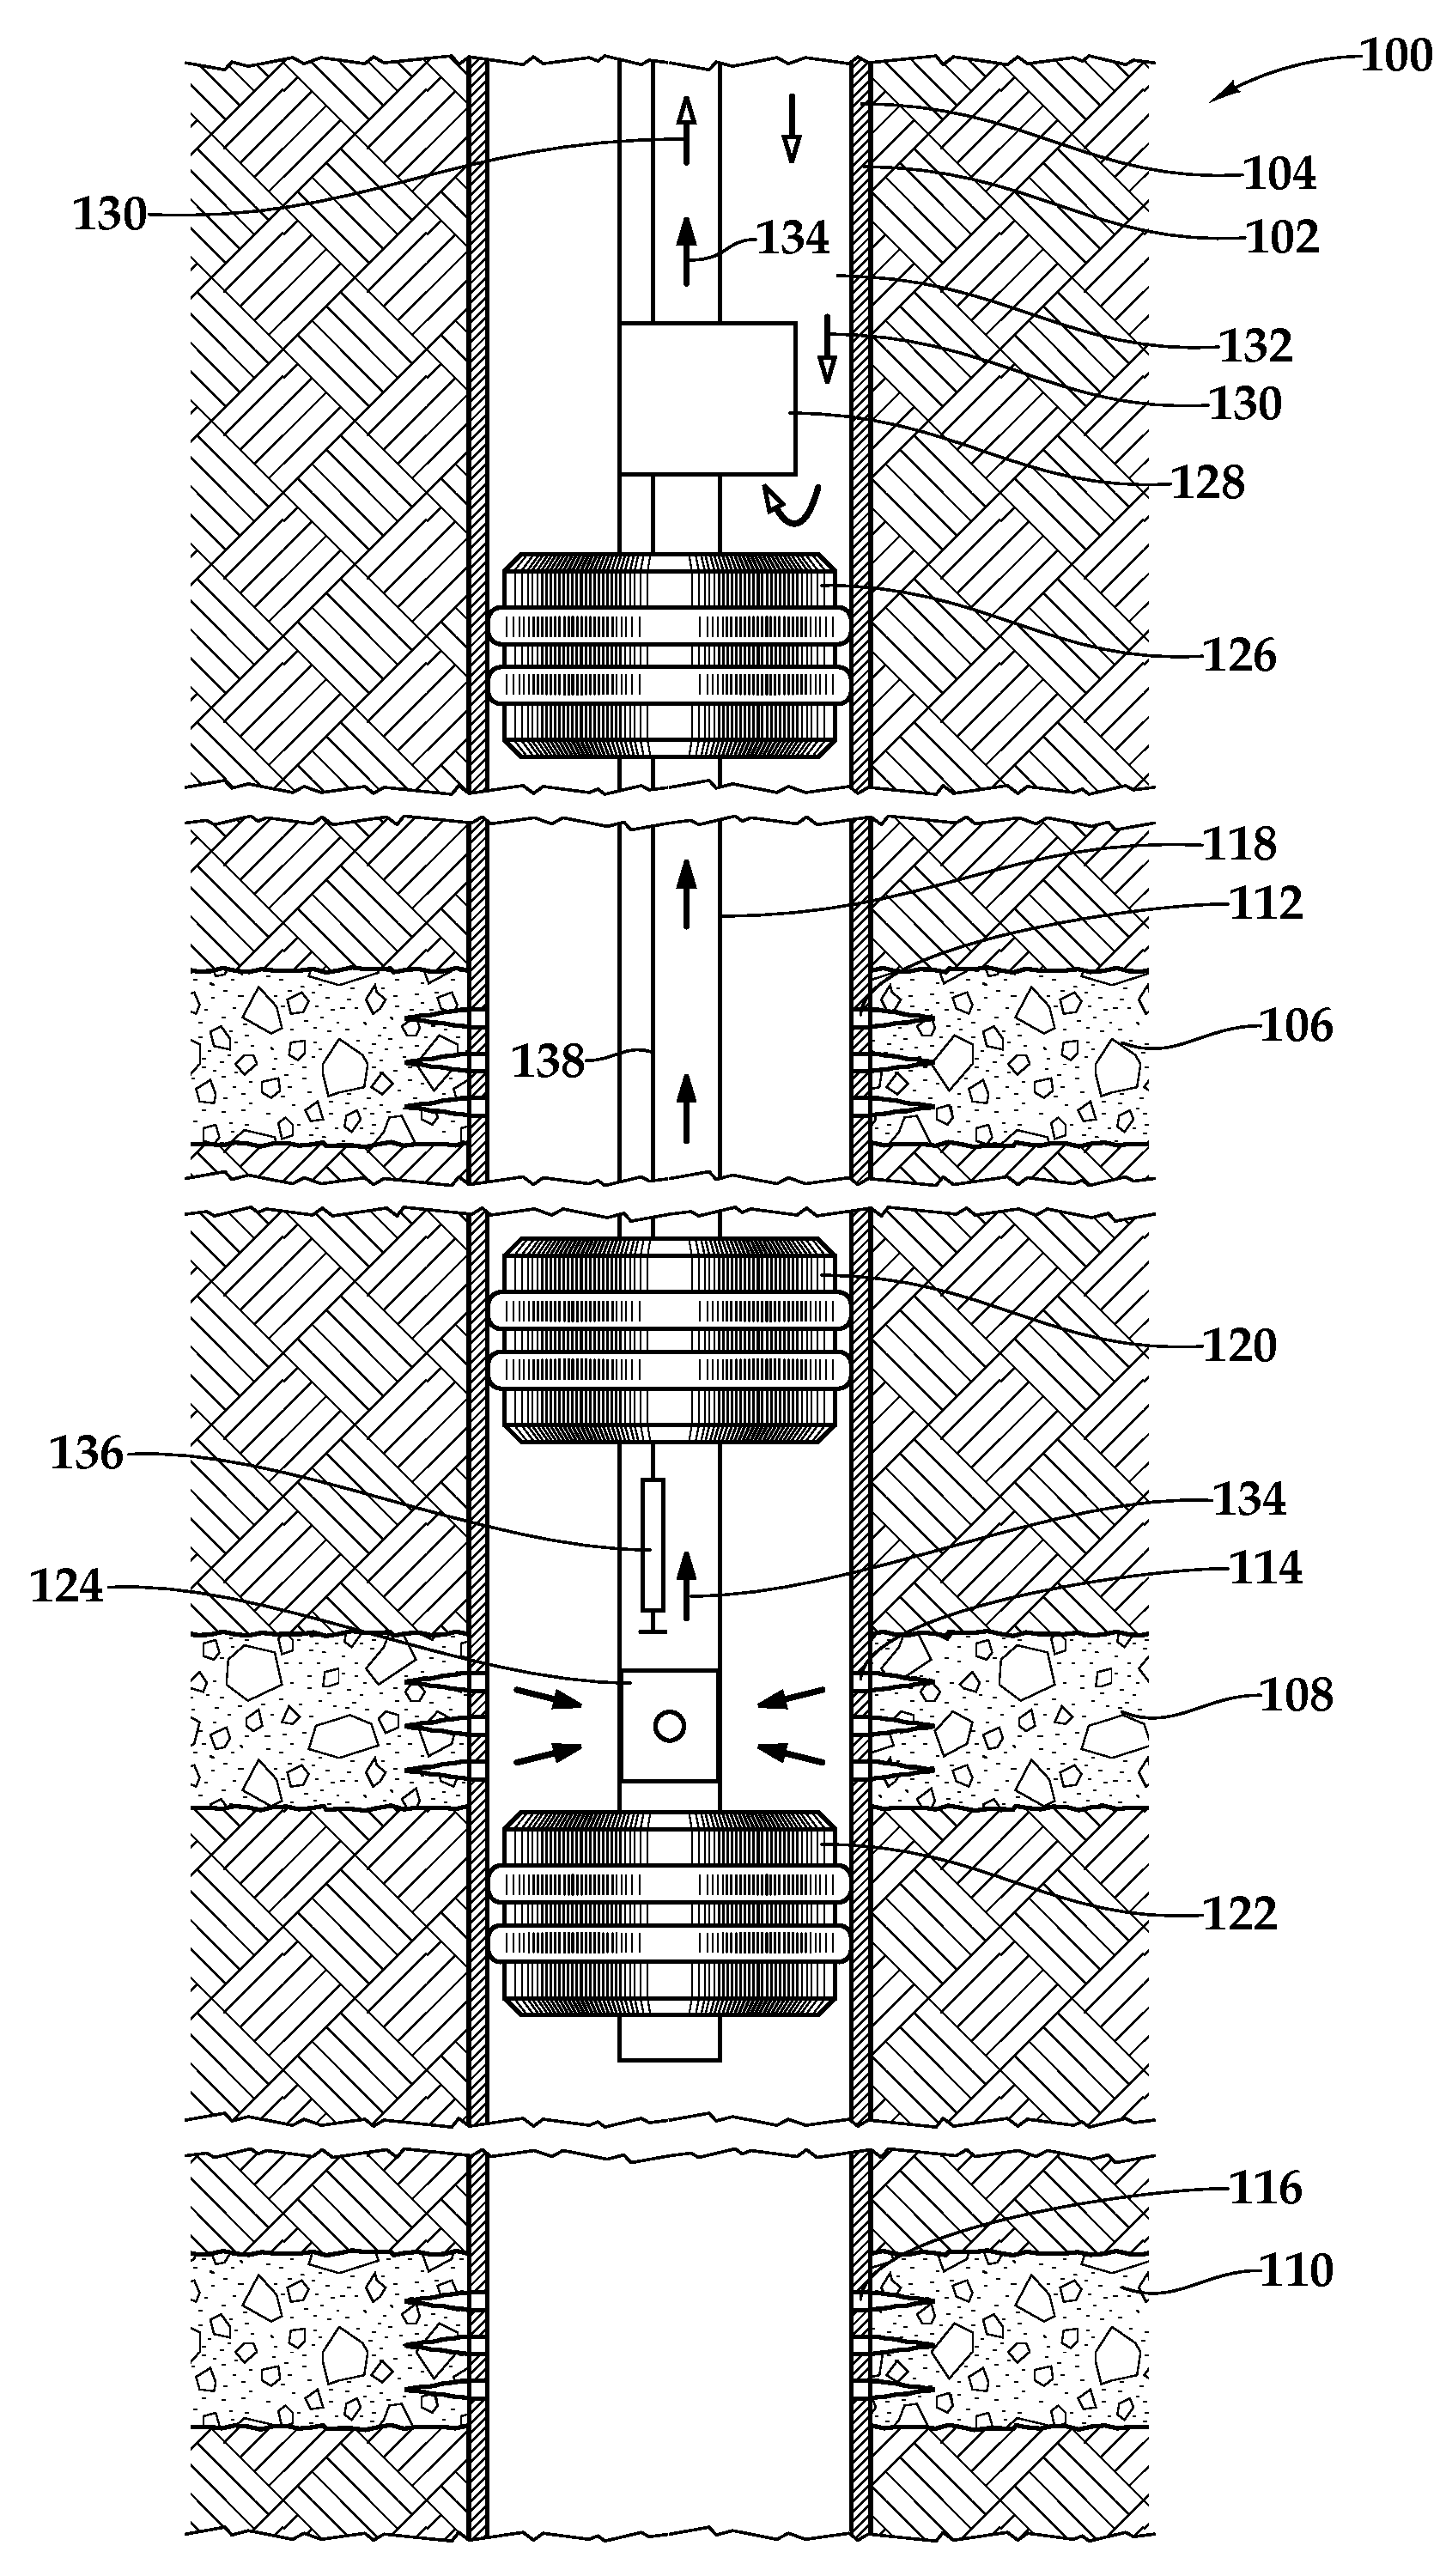 Multi-zone formation fluid evaluation system and method for use of same